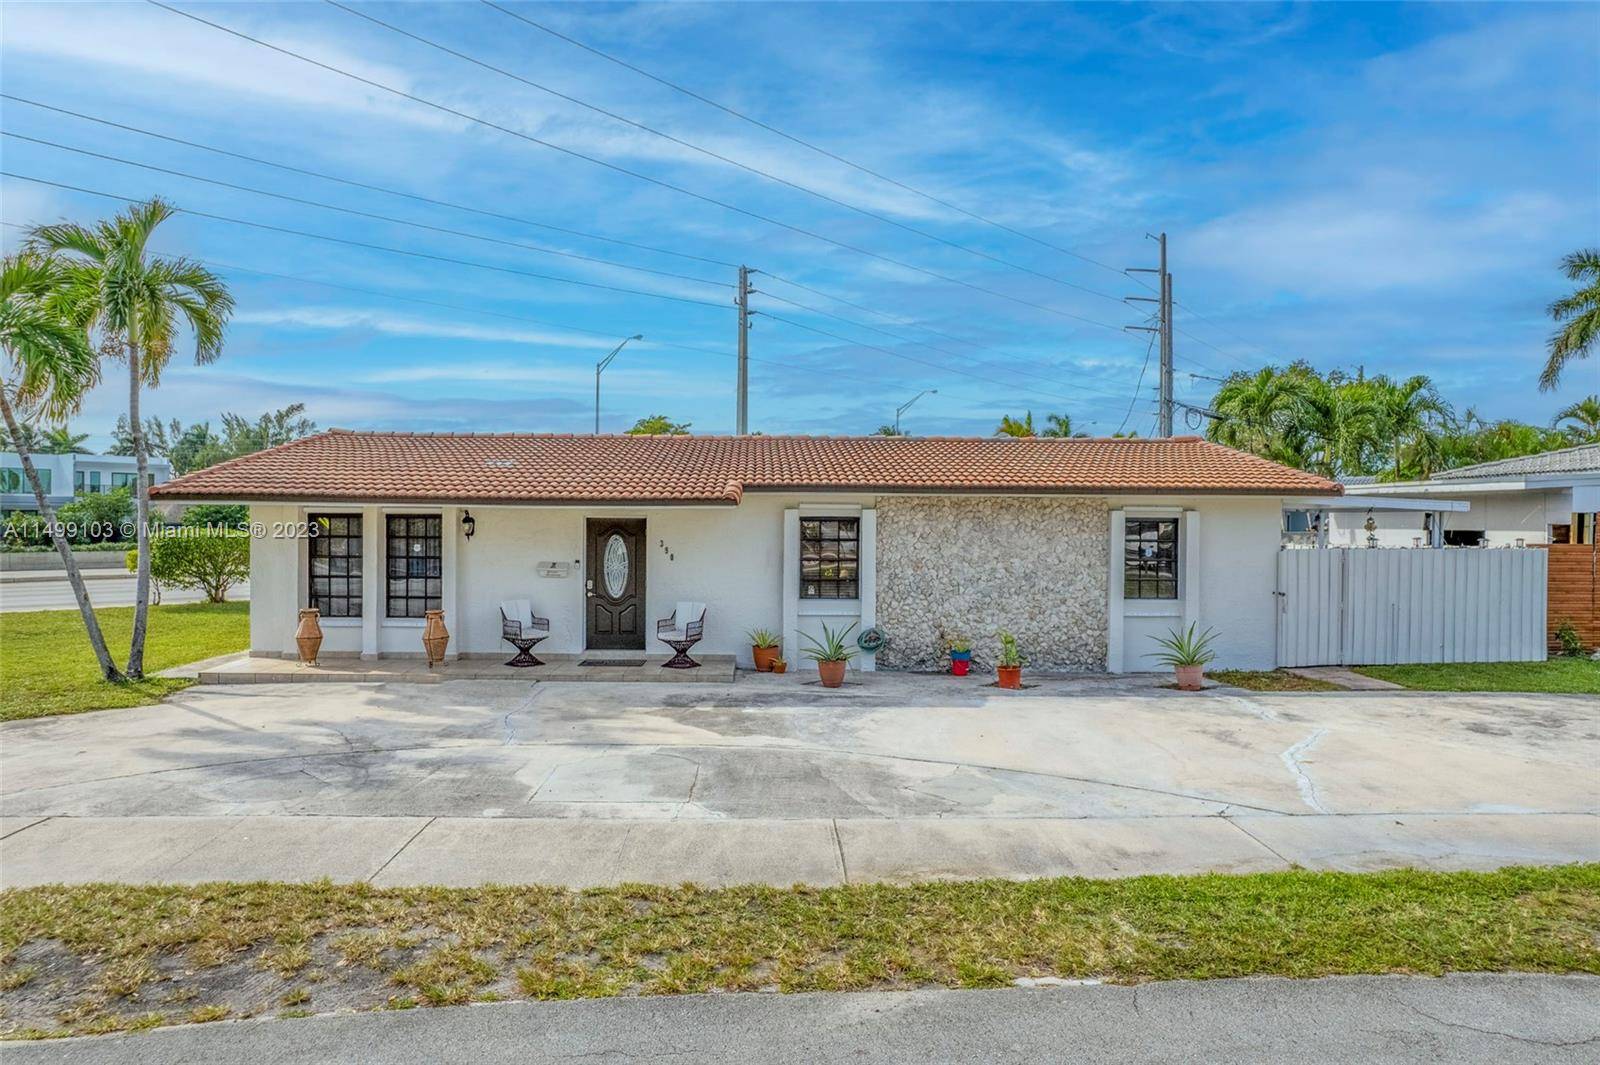 Facing Ken Mattingly Park on a cul de sac, this spacious 6 bed, 3 bath home is located in the very desirable Deer Park in Hialeah.